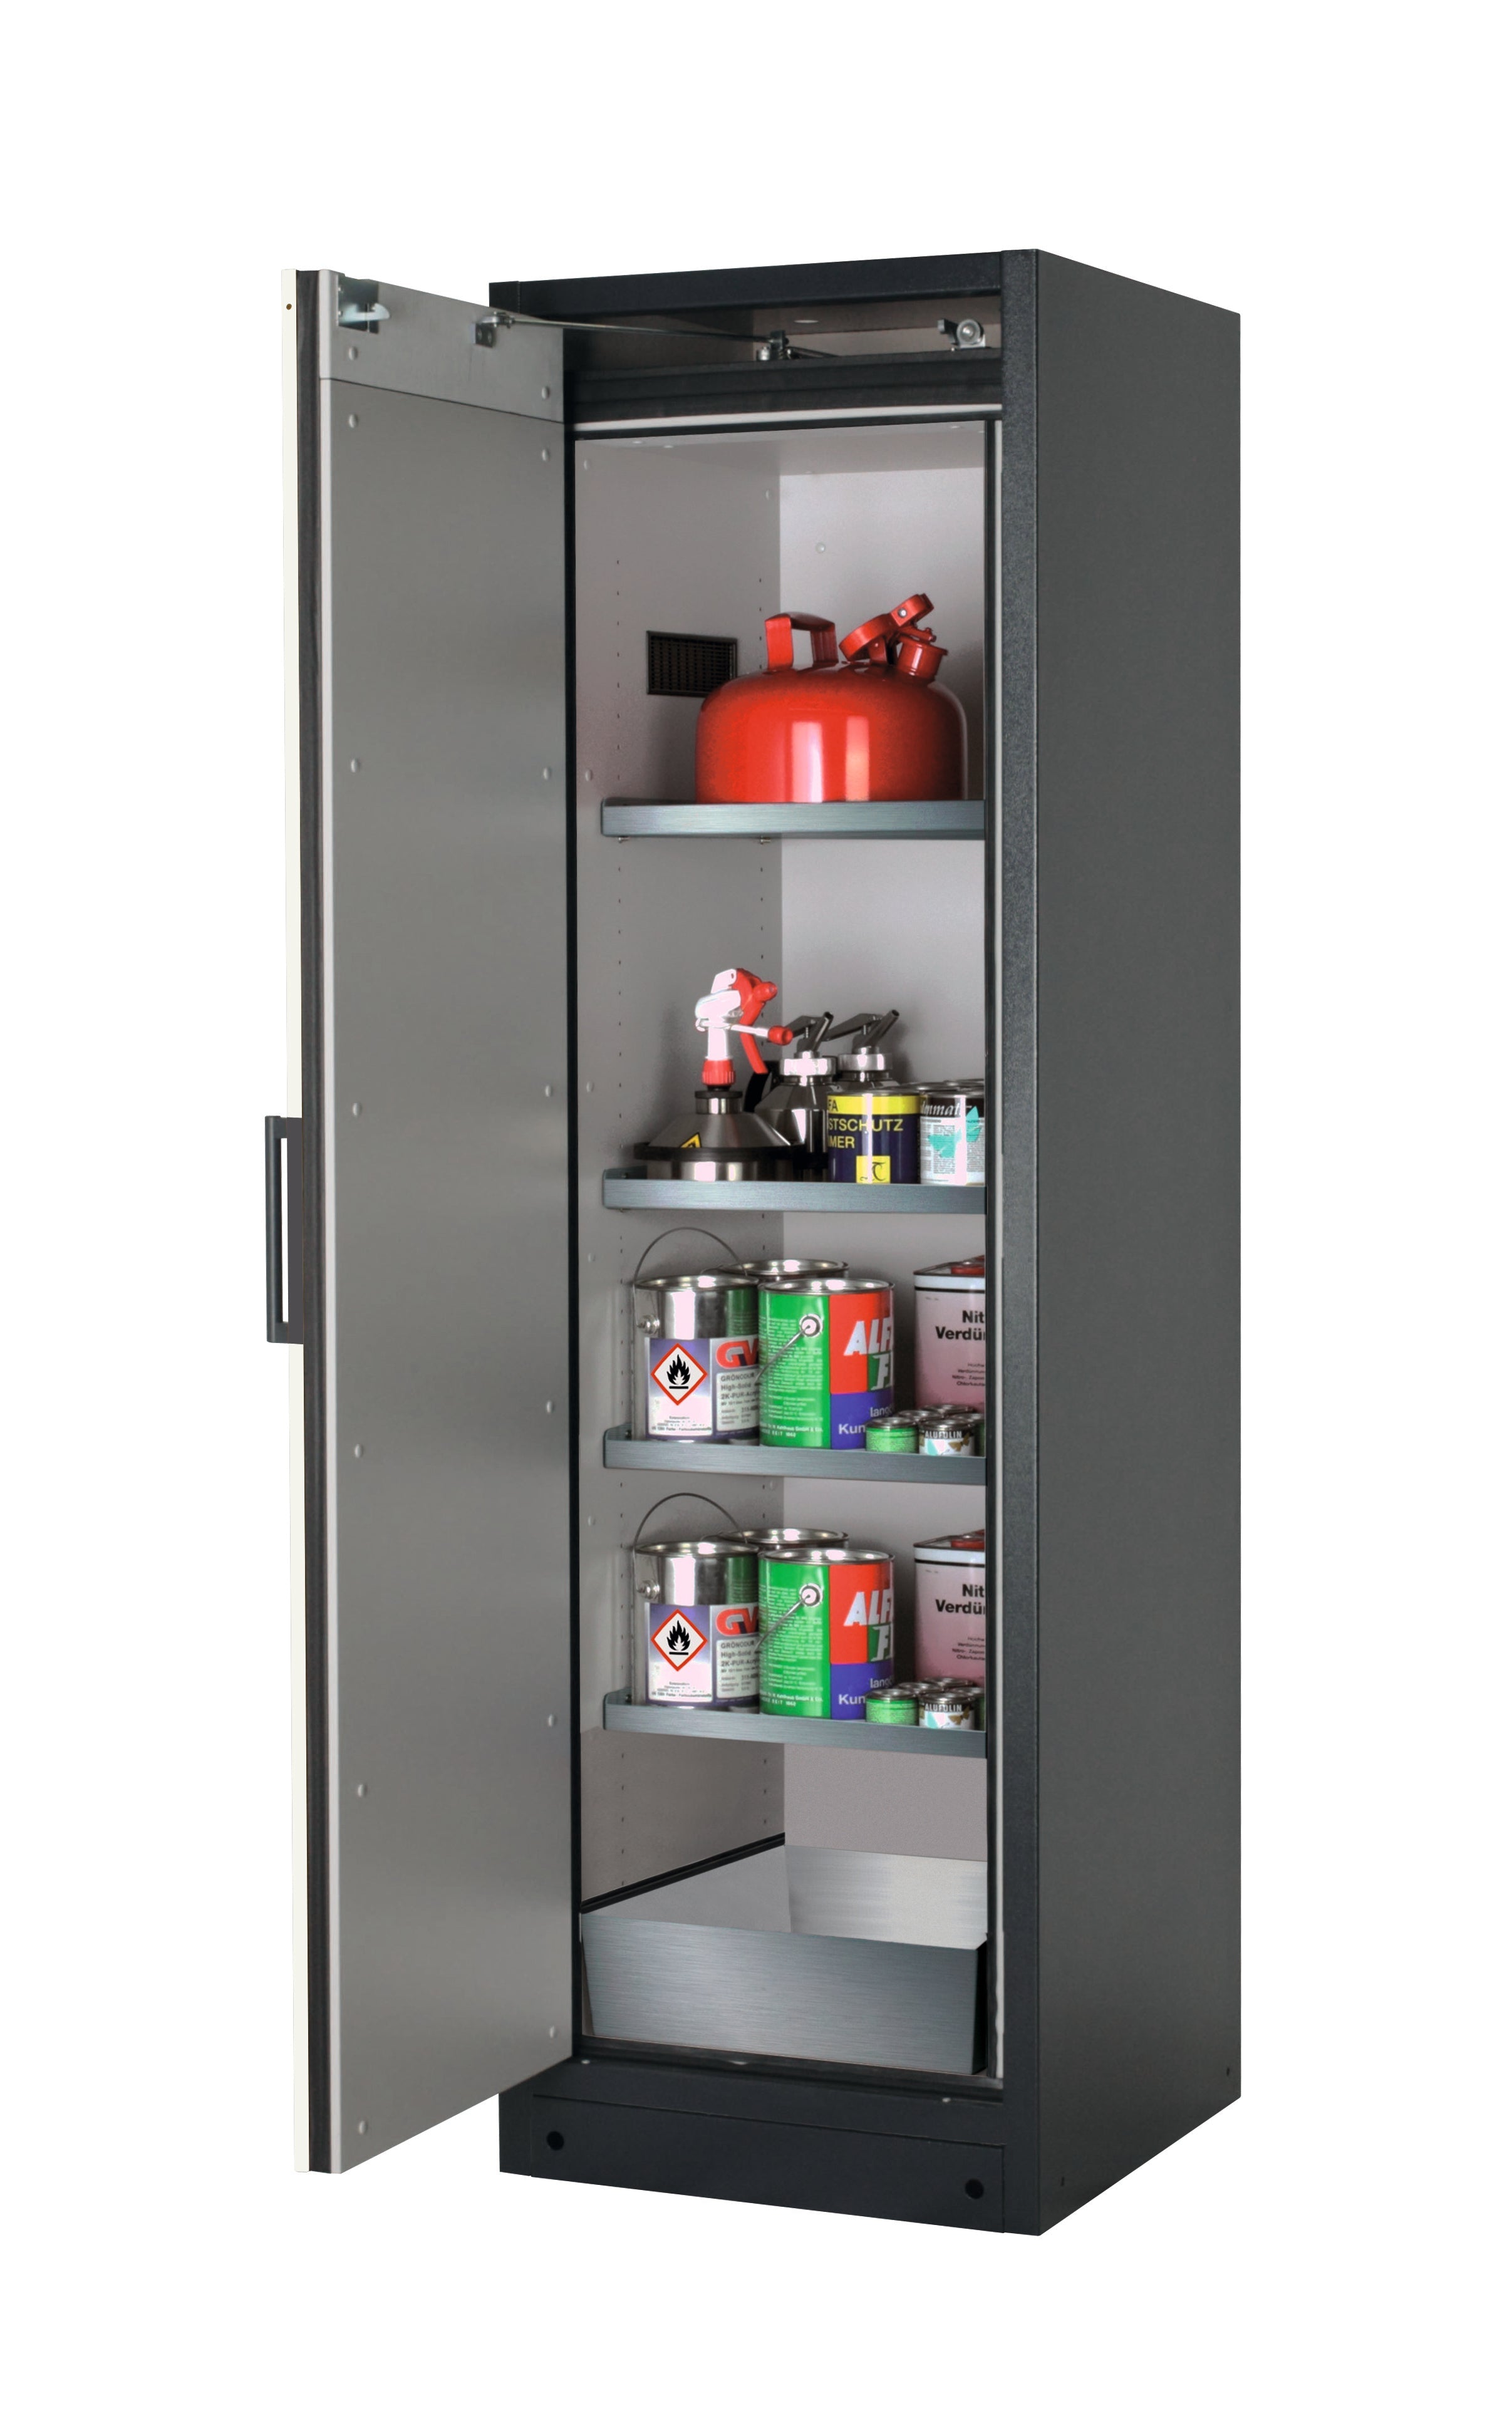 Type 90 safety storage cabinet Q-CLASSIC-90 model Q90.195.060 in asecos silver with 4x shelf standard (stainless steel 1.4301),